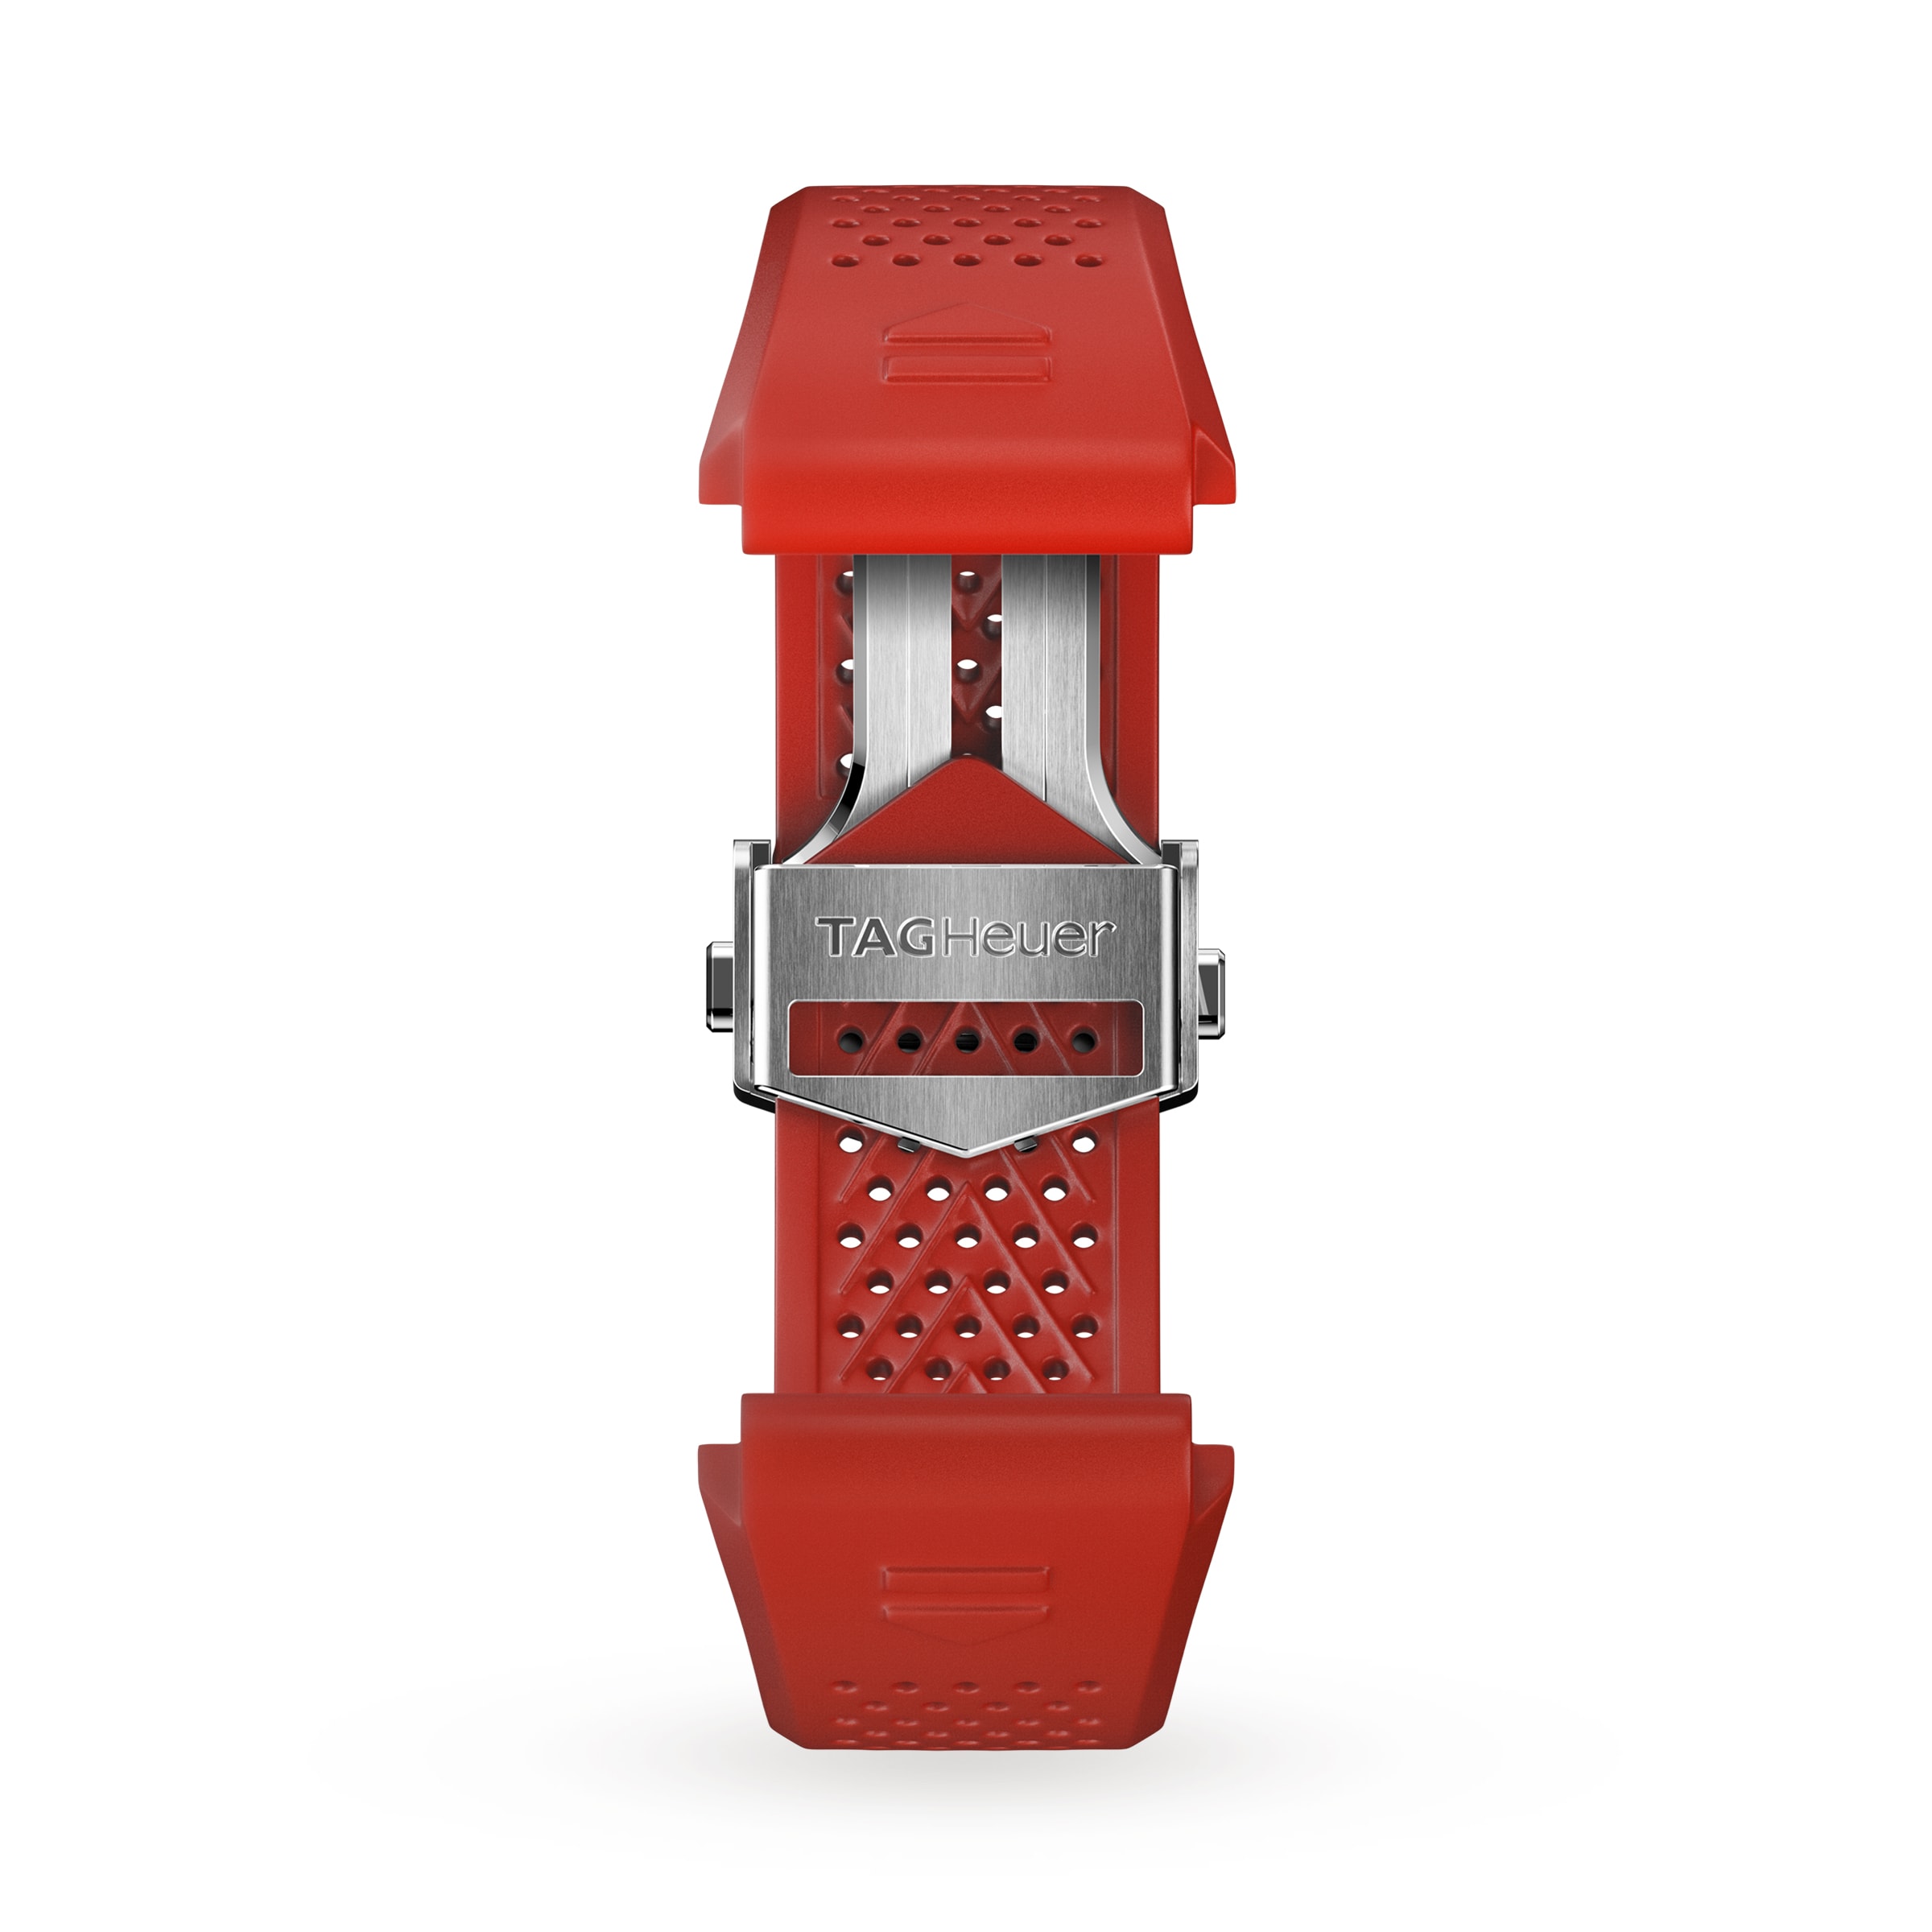 Connected Red Rubber Strap